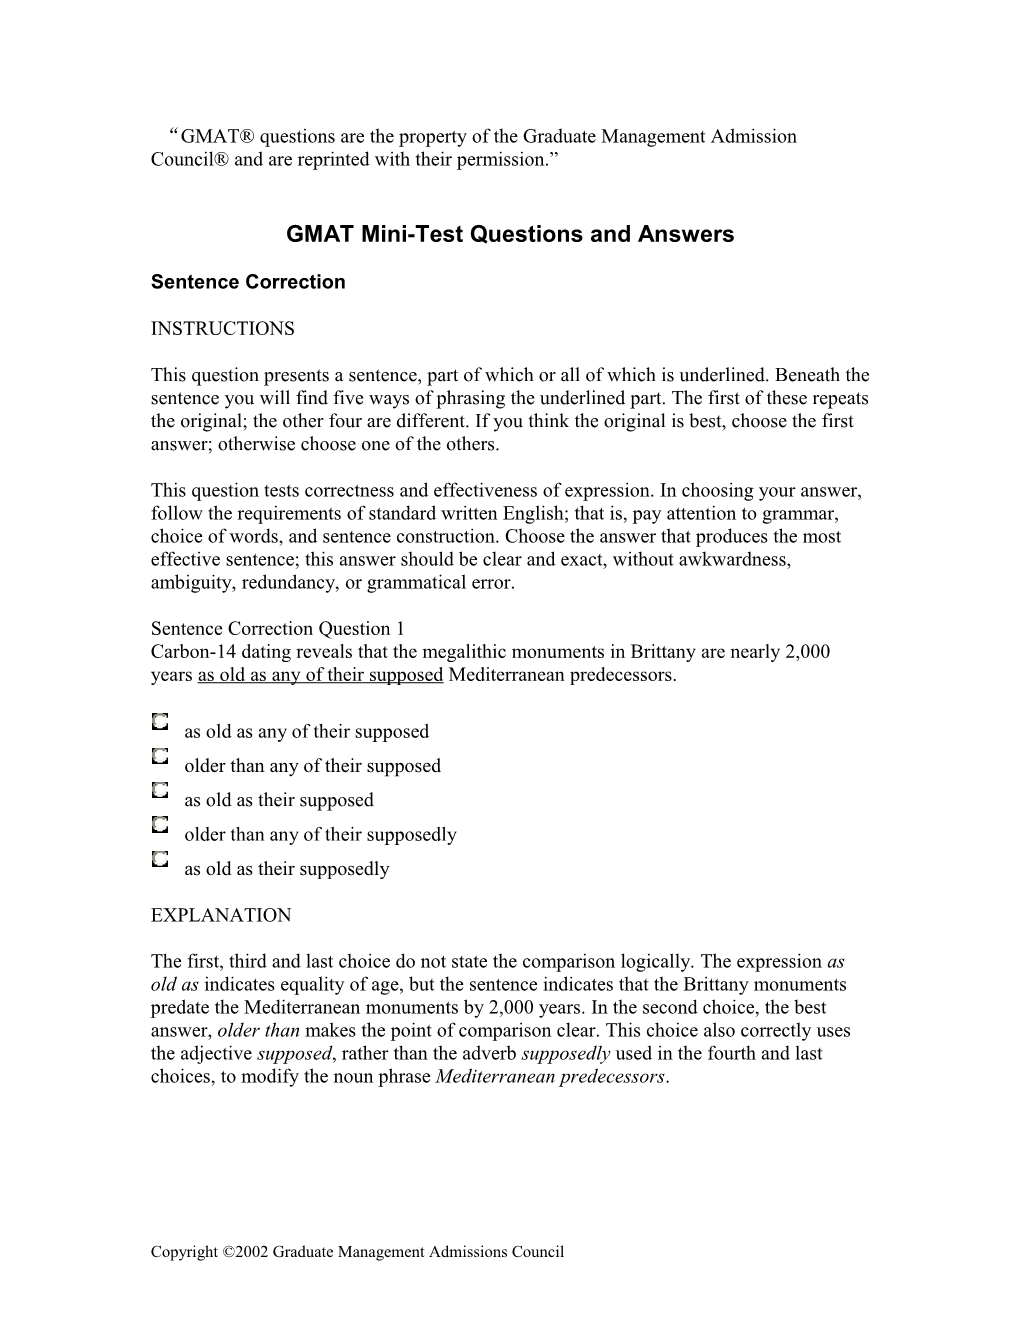 GMAT Mini-Test Questions and Answers